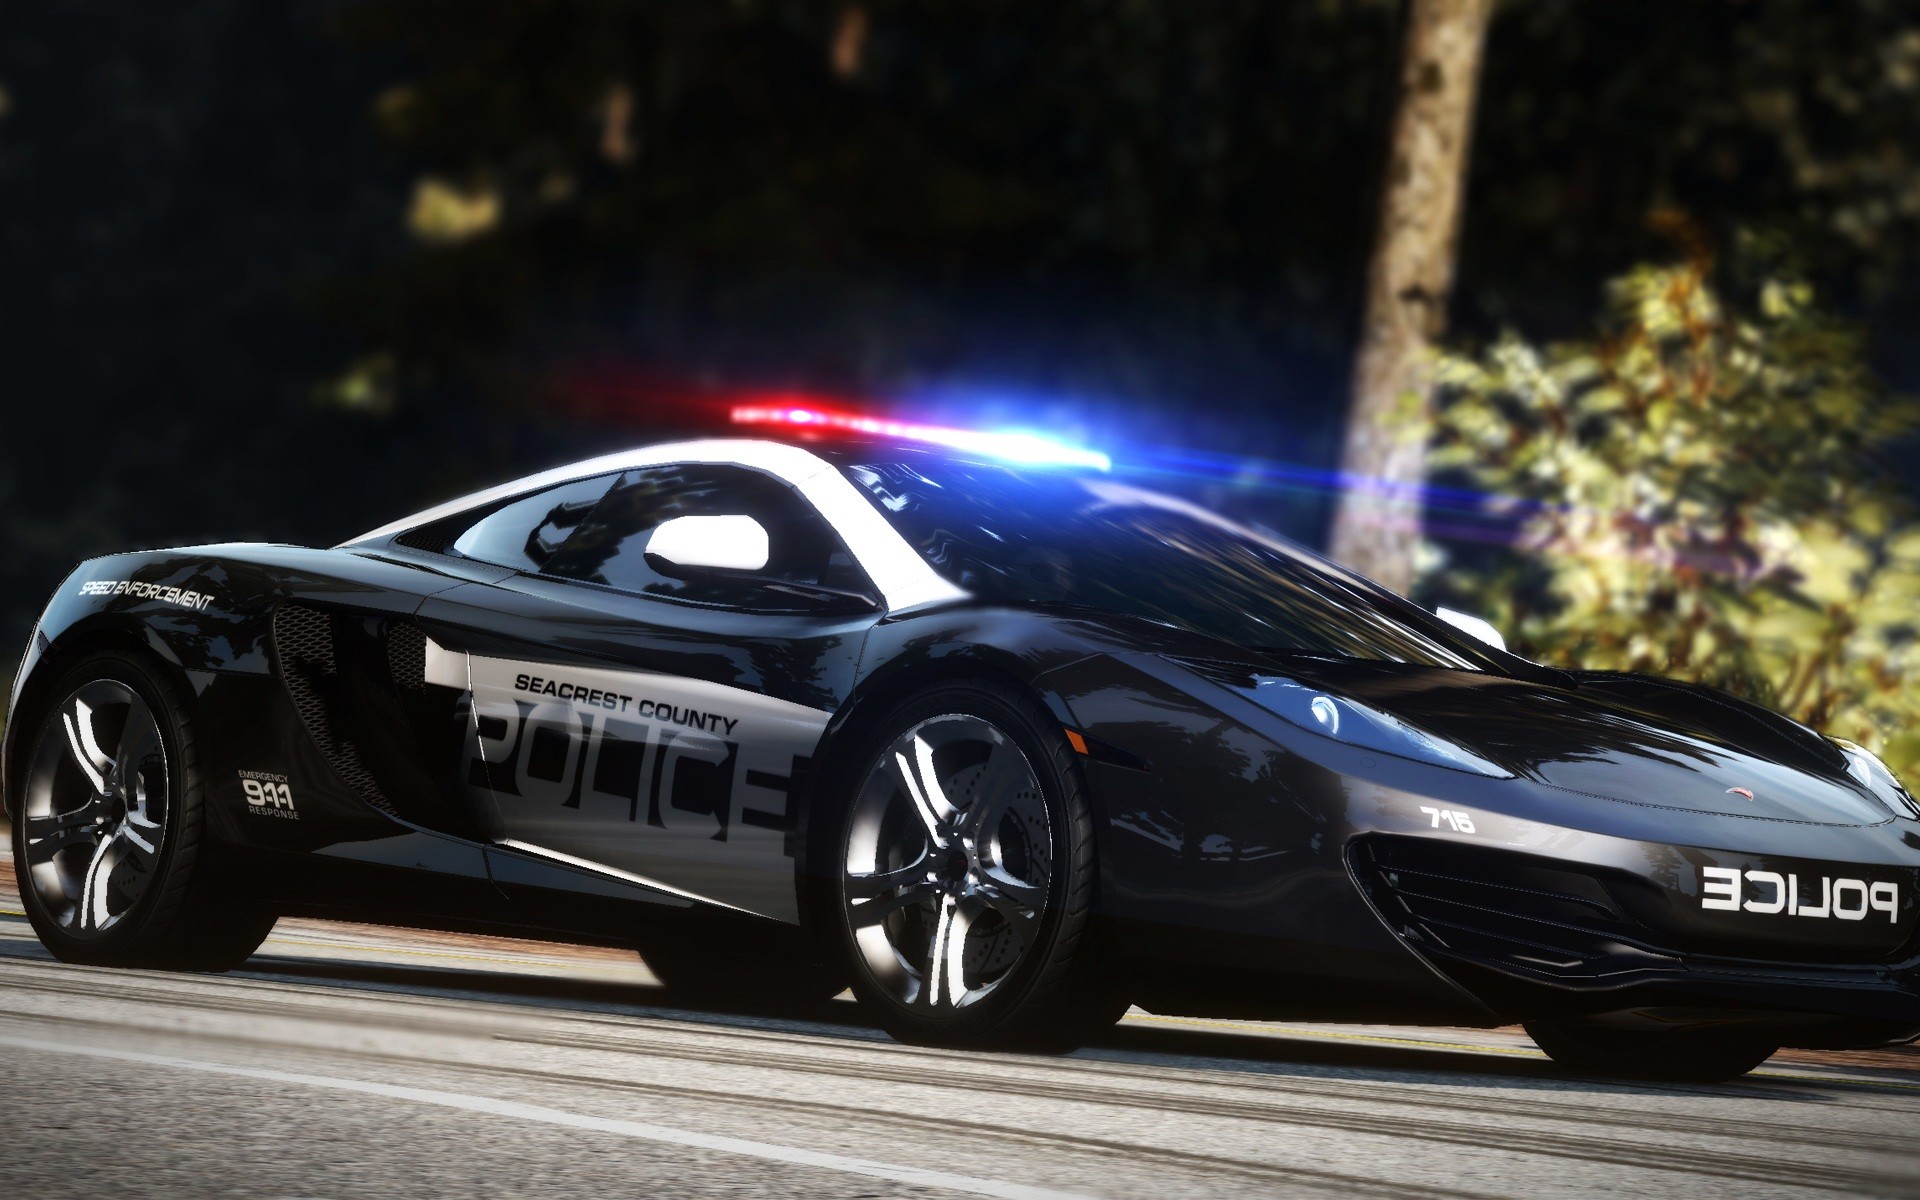 Police Car Wallpapers 16001200 Cop Backgrounds 45 Wallpapers Adorable Wallpapers